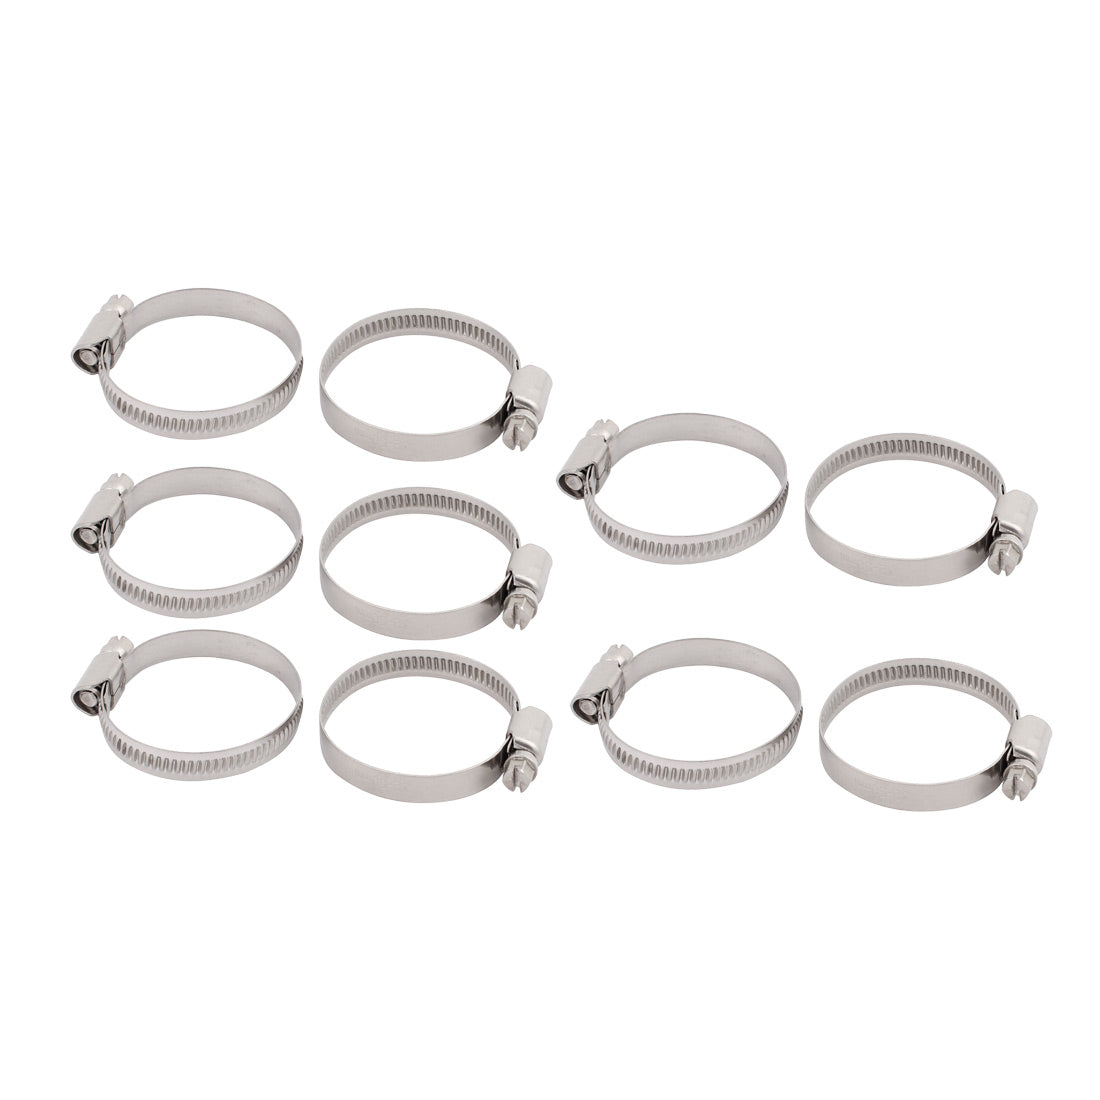 uxcell Uxcell 10Pcs 32mm to 50mm Dia Range Metal German Type Adjustable Hose Clamp Hoop